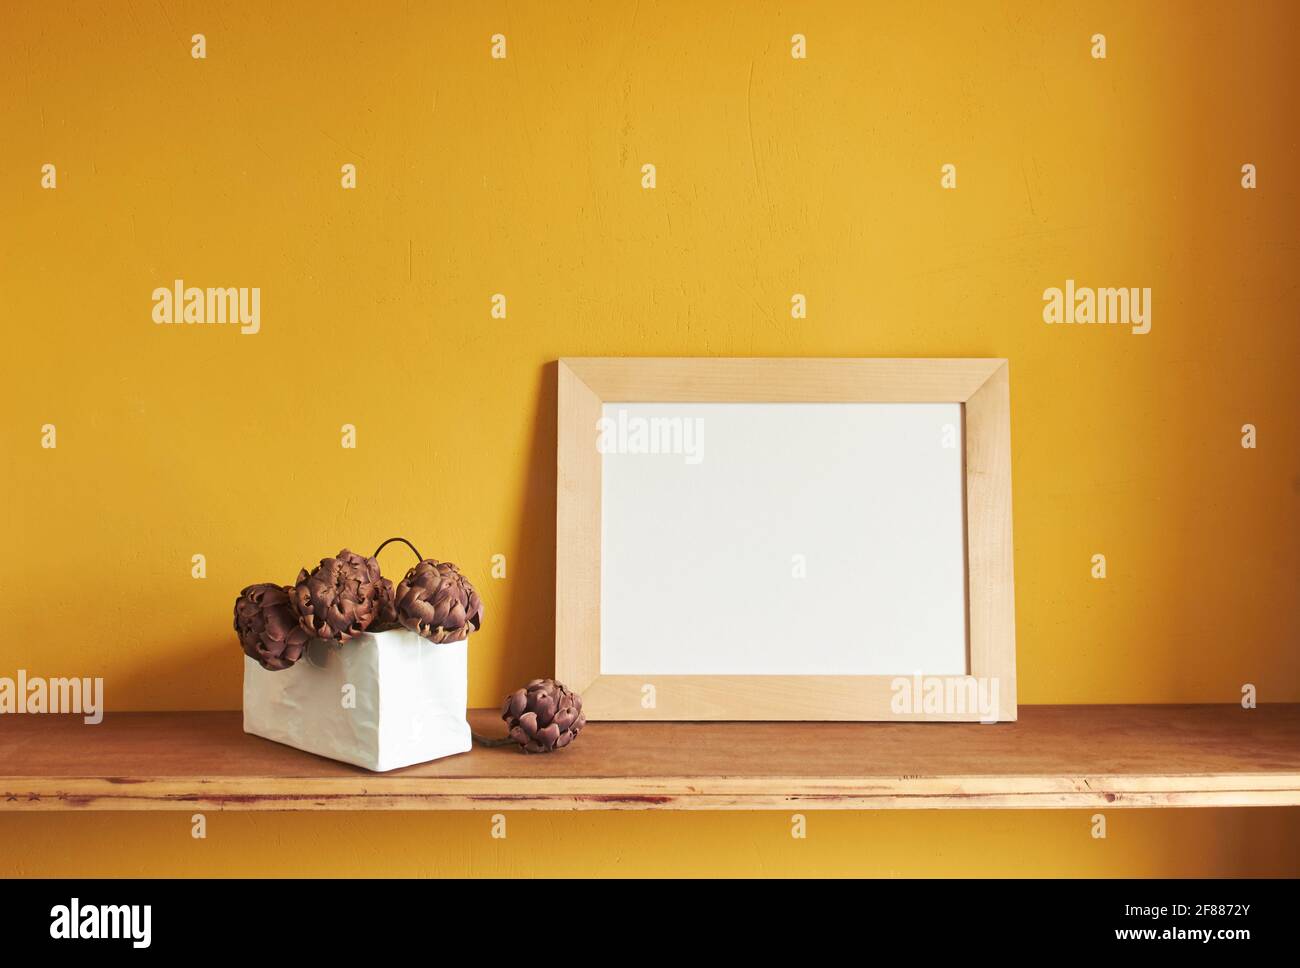 Wooden frames mockup. Dry decorative artichokes in a vase on an old wooden shelf. Composition on a yellow wall background Stock Photo